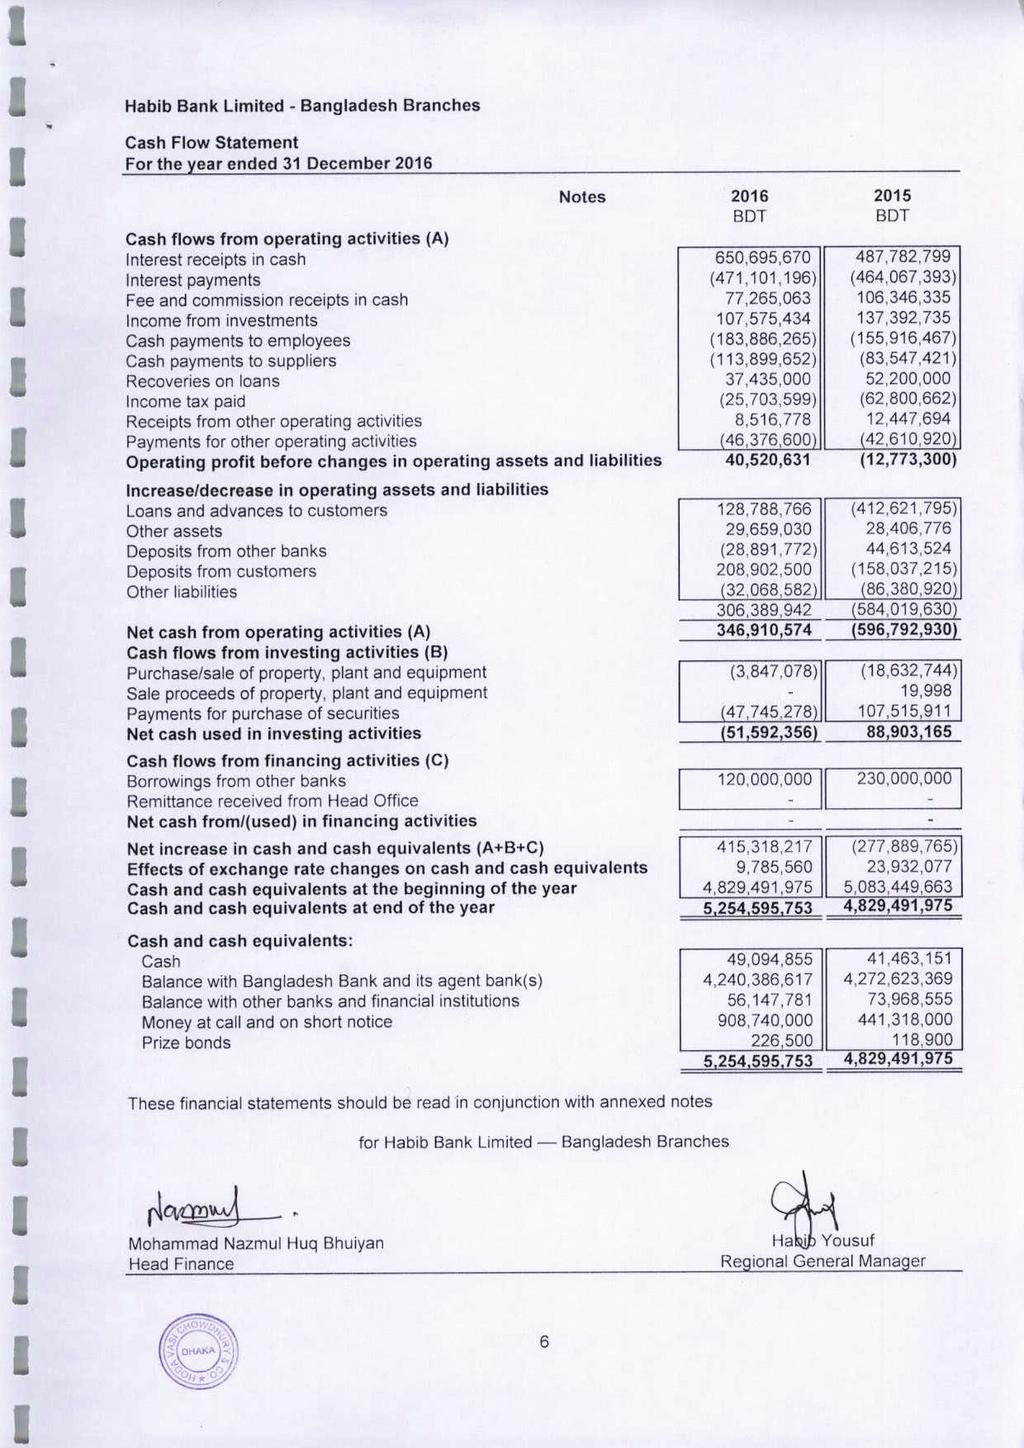 Habib Bank Limited Bangladesh Branches Cash Flow Statement Cash flows from operating activities (A) Interest receipts in cash Interest payments Fee and commission receipts in cash Income from